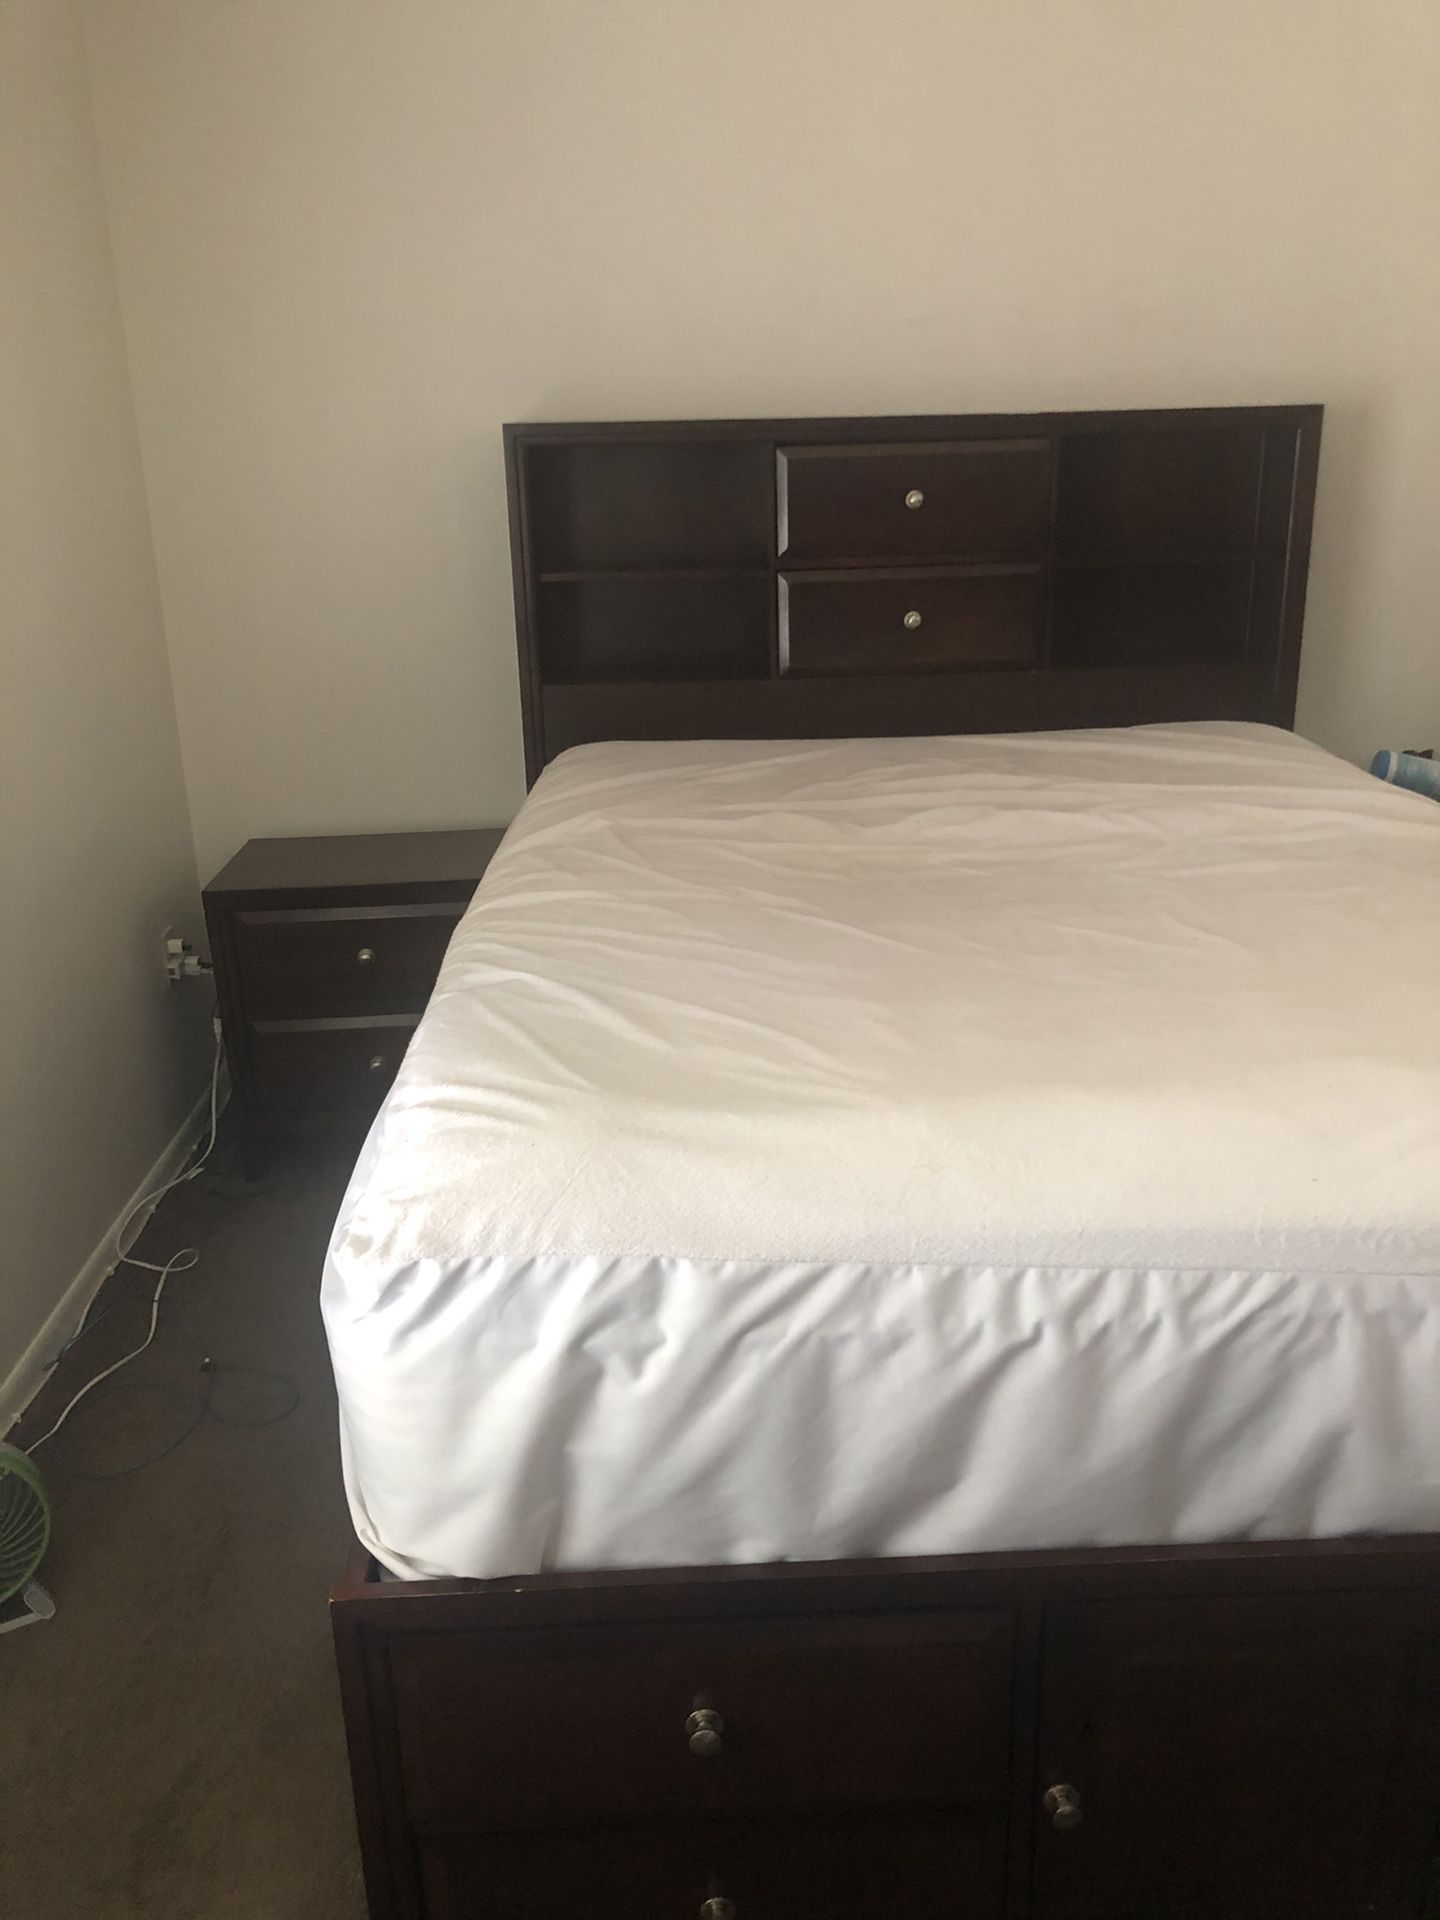 Queen Size Storage Bed Frame & Nightstand For Sale $300 obo